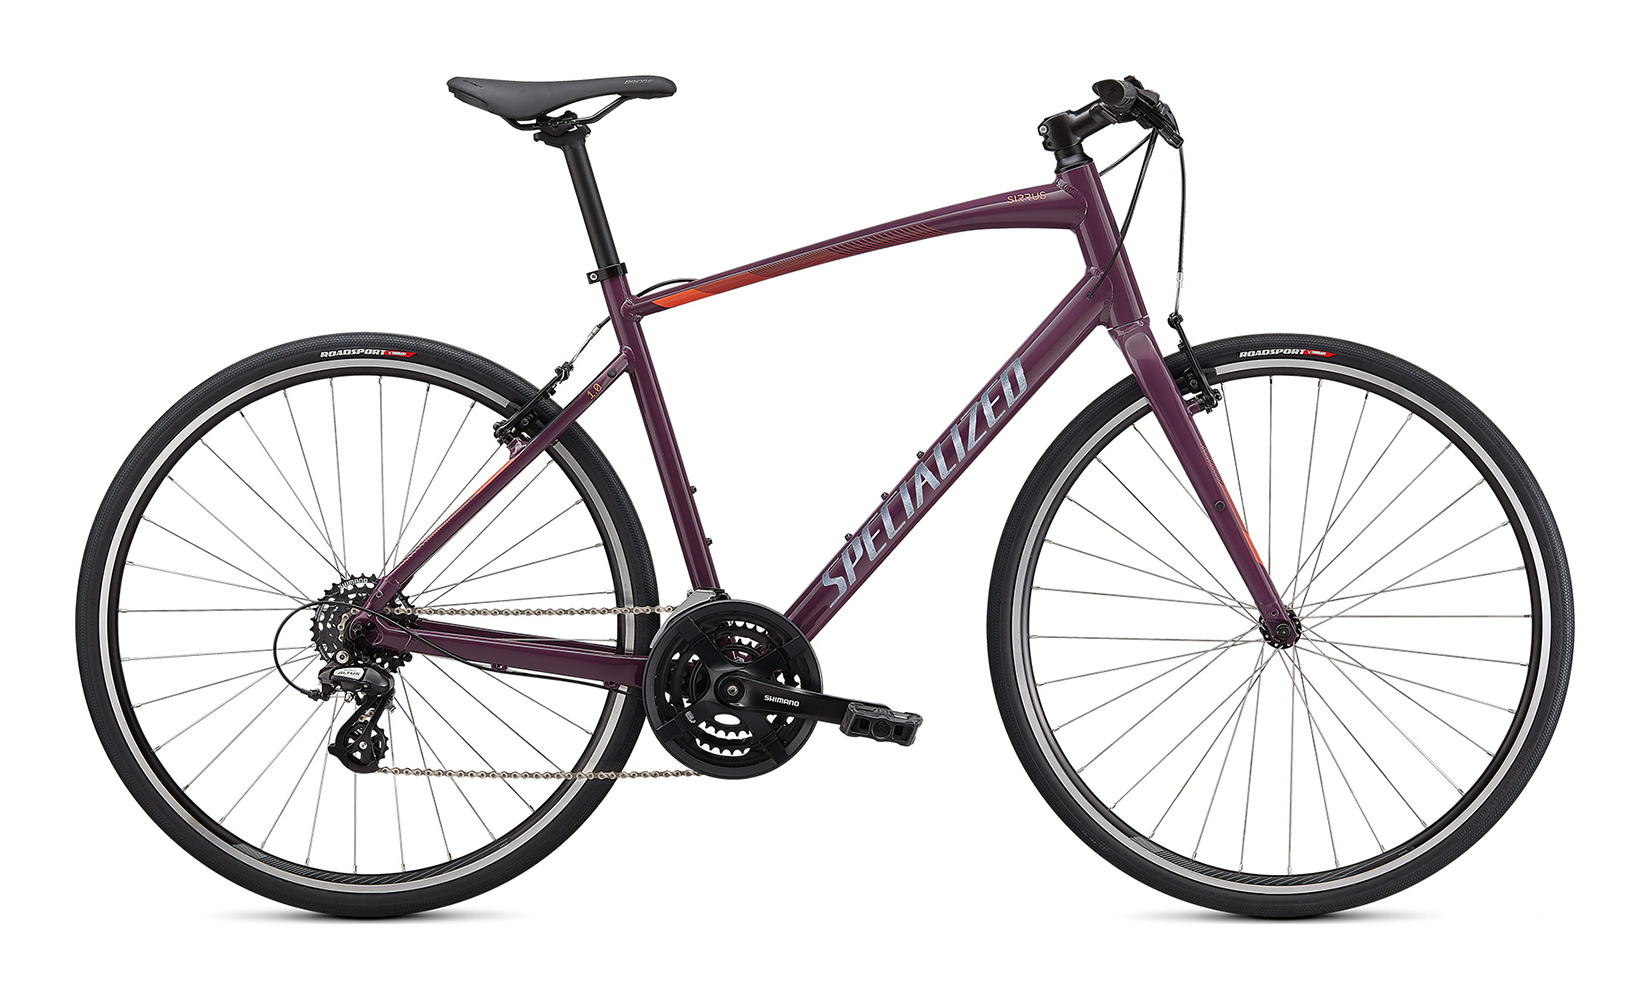  Specialized Sirrus 1.0 (Gloss Lilac/Vivid Coral/Satin black)